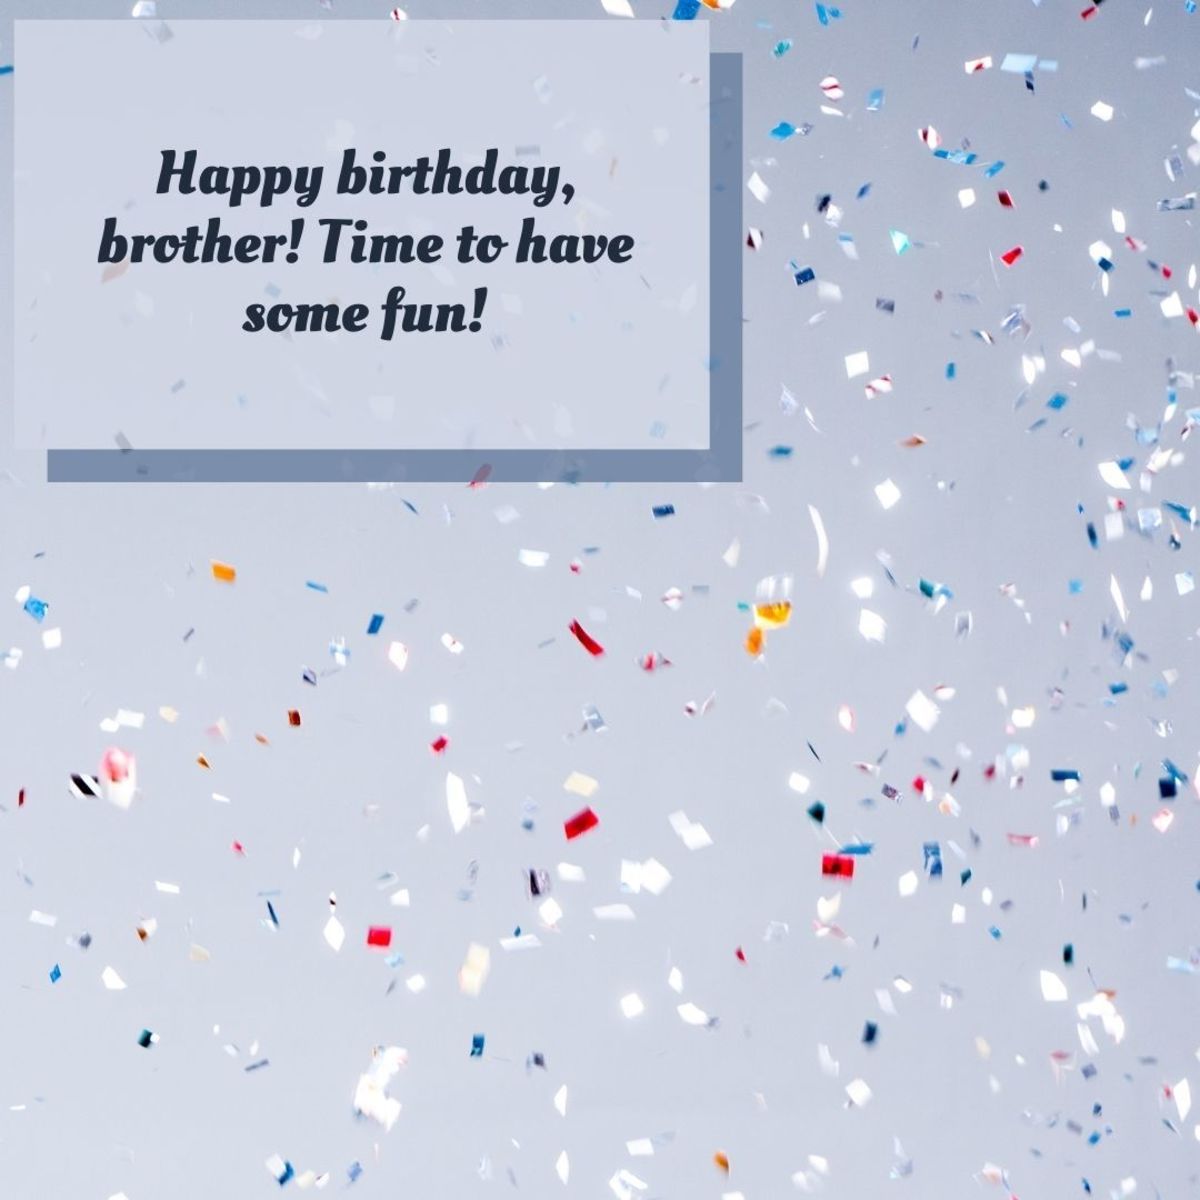 141 Birthday Wishes, Texts, and Quotes for Brothers - Holidappy